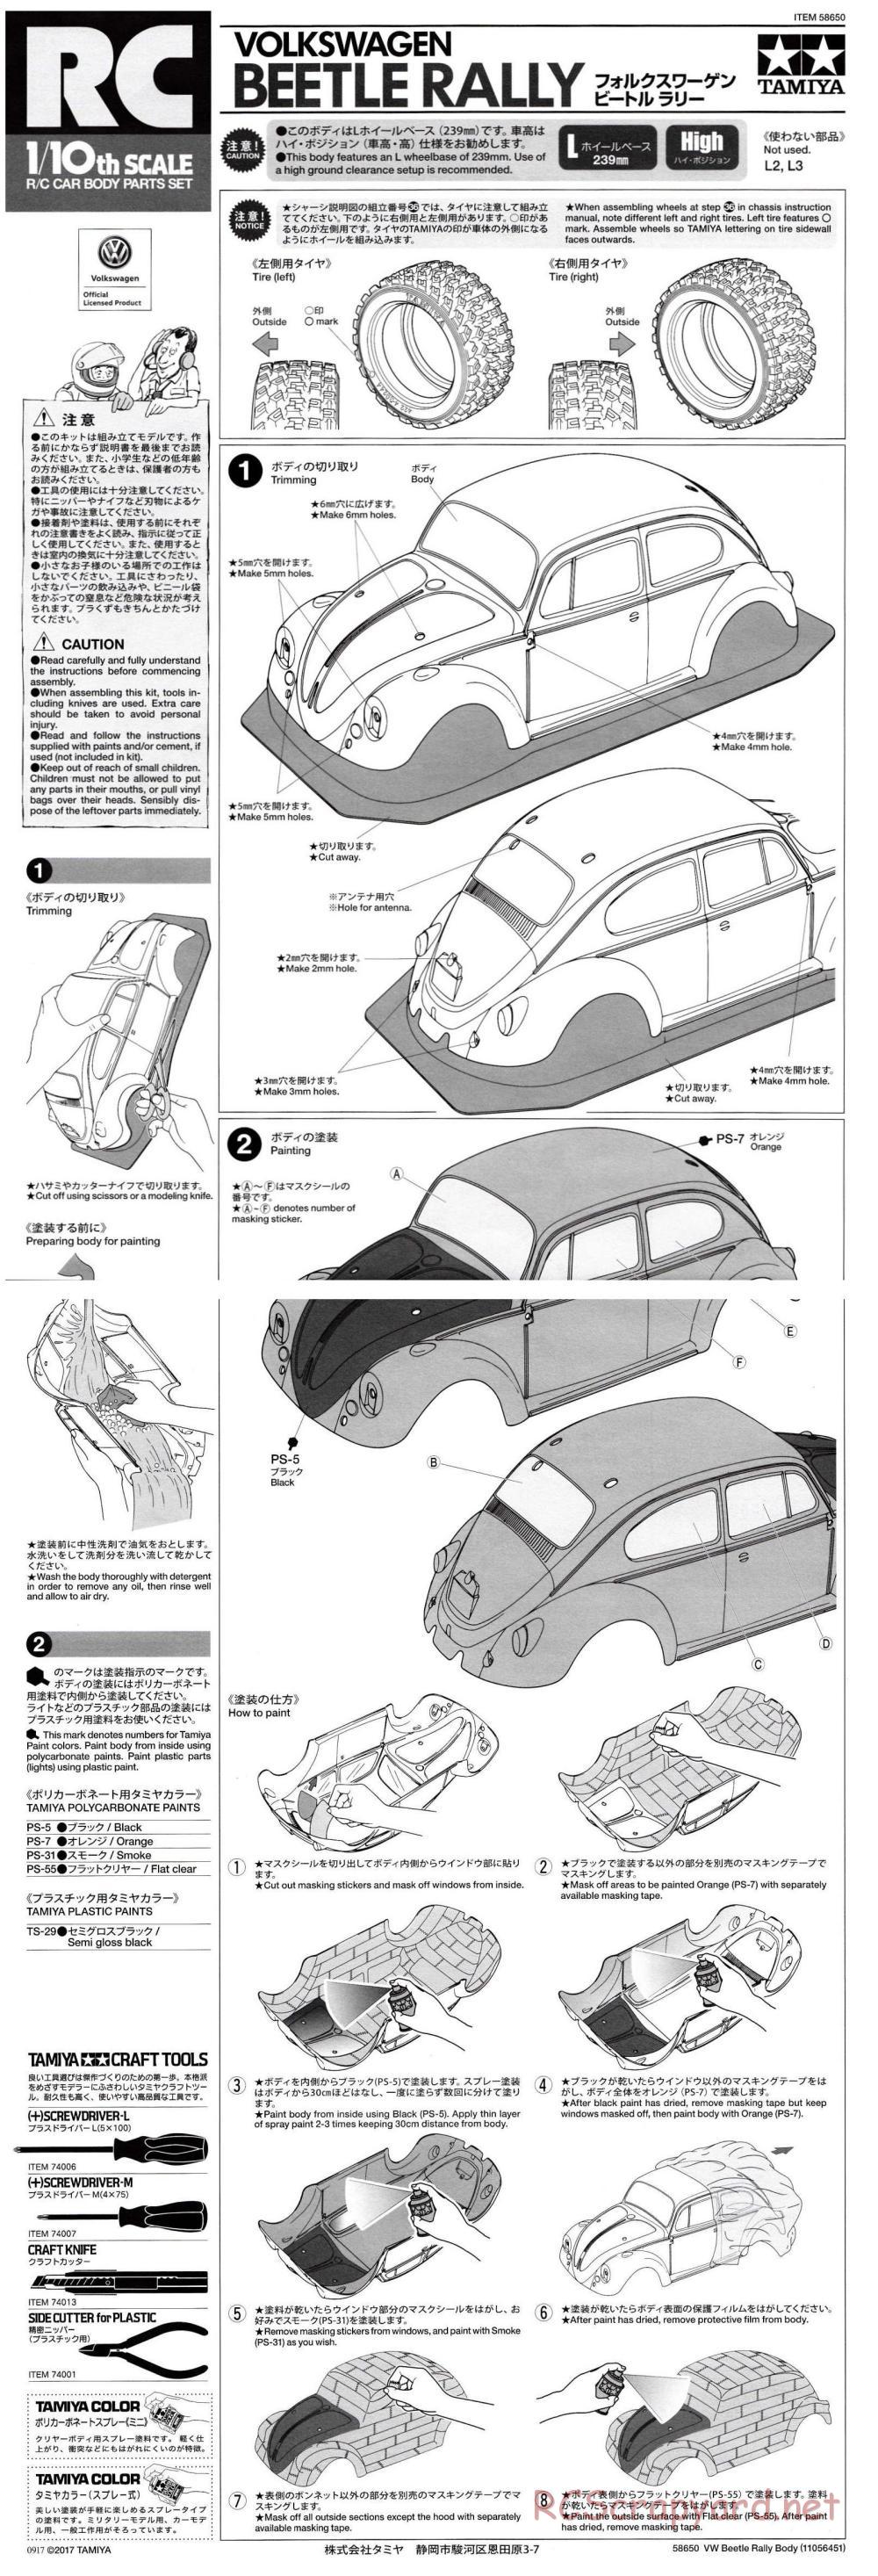 Tamiya - Volkswagen Beetle Rally - MF-01X Chassis - Body Manual - Page 1